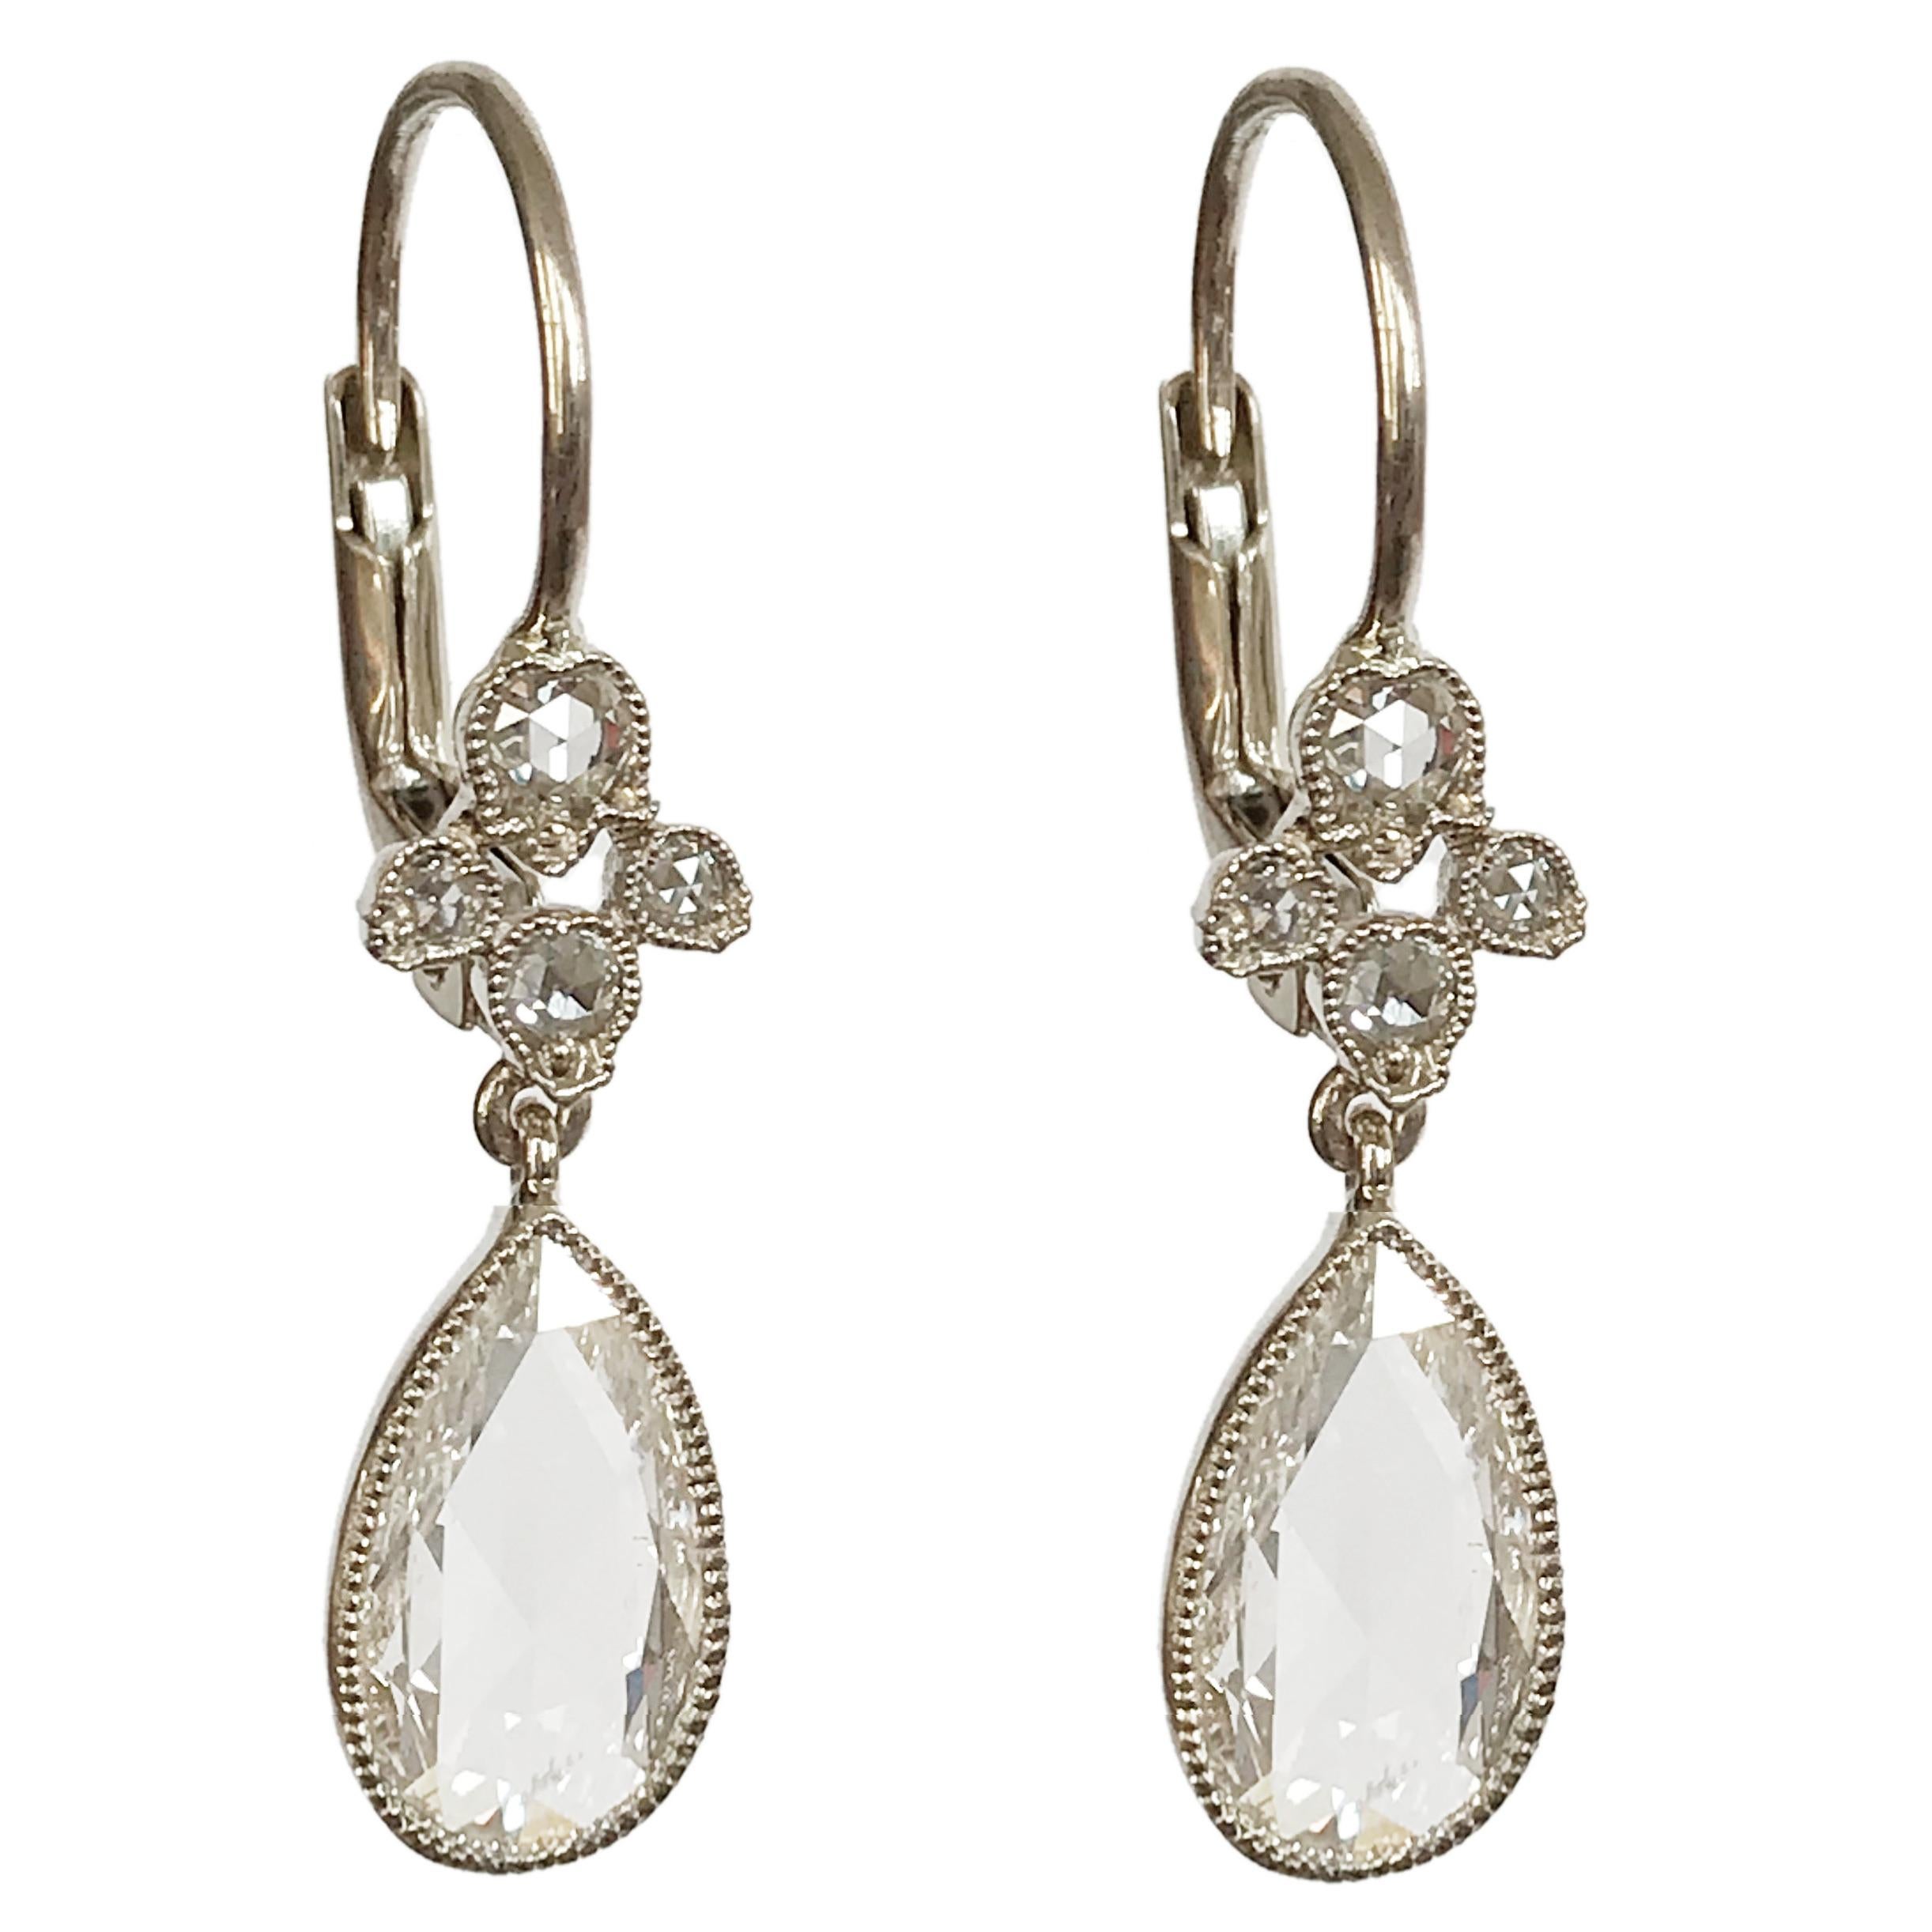 Dalben design One of a Kind 18k white gold earrings with two  bezel-set pear shape rose cut diamonds totl weight  2,51 carat and a floral motif  with rose cut diamonds weight 0,16 carat.
The stone setting is finished with 